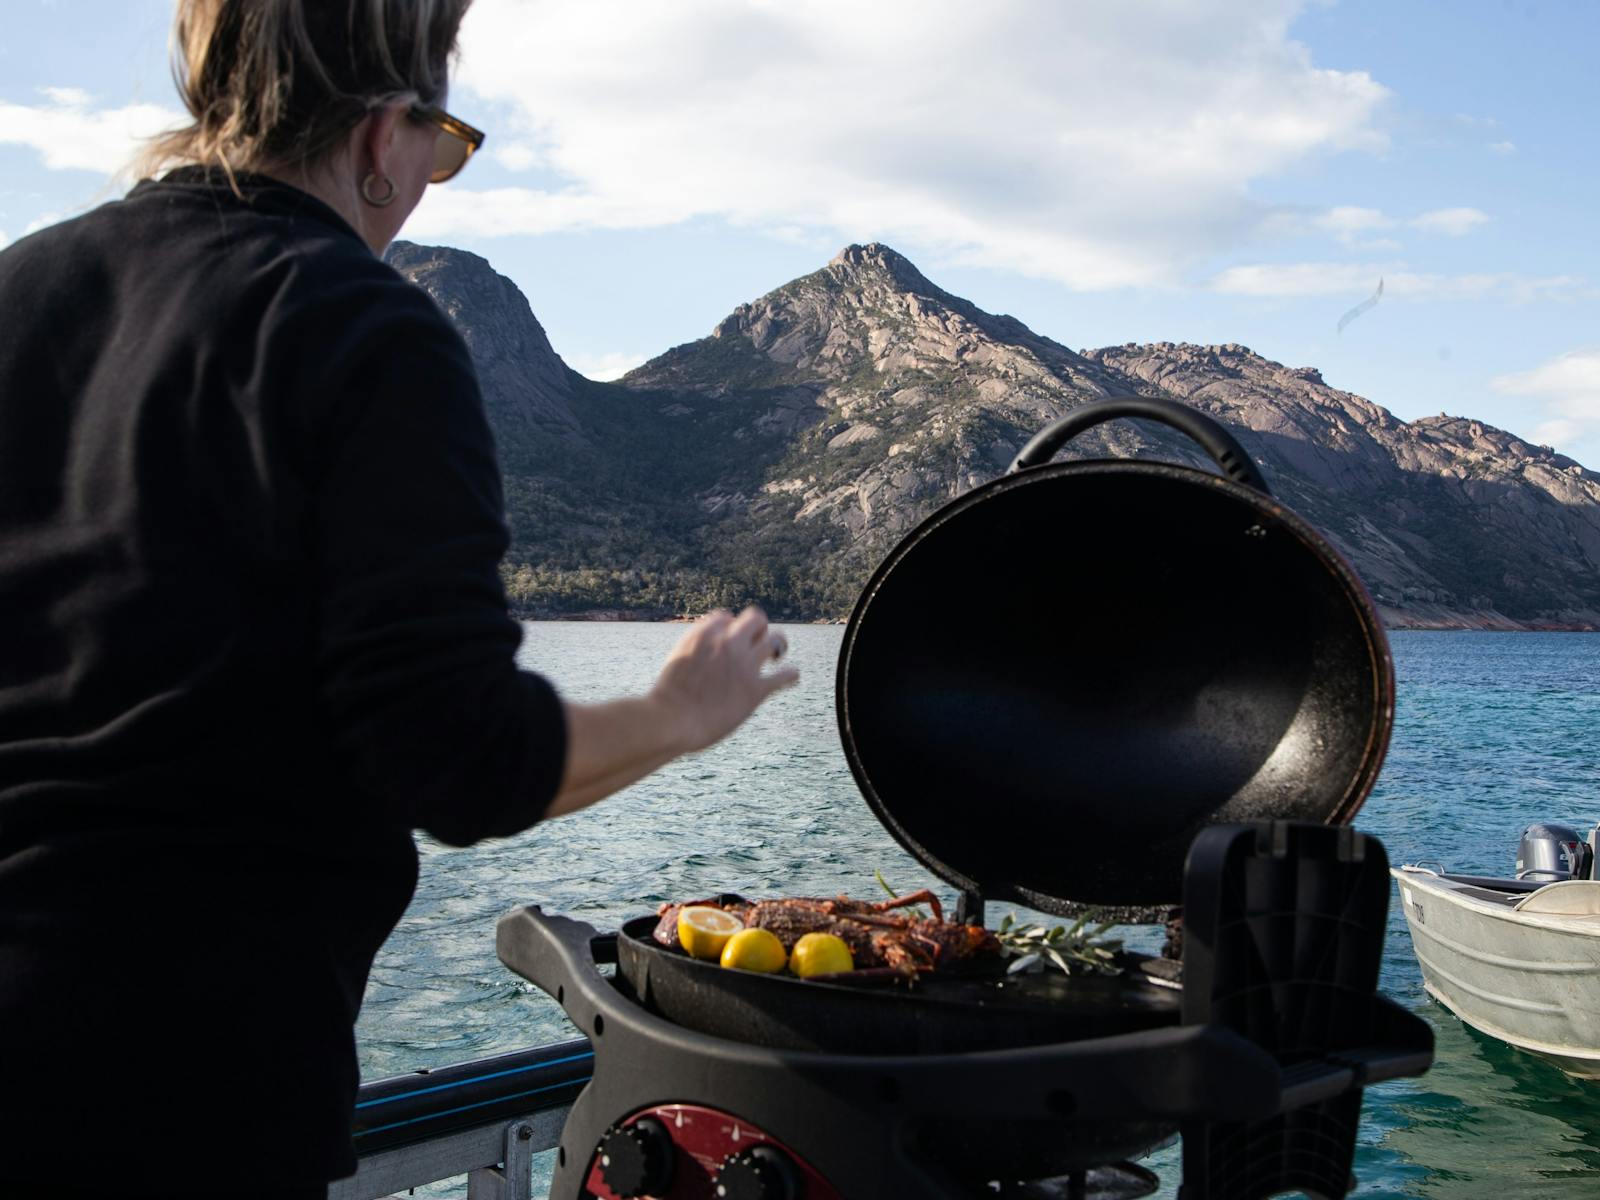 Seafood BBQ with mountains in background